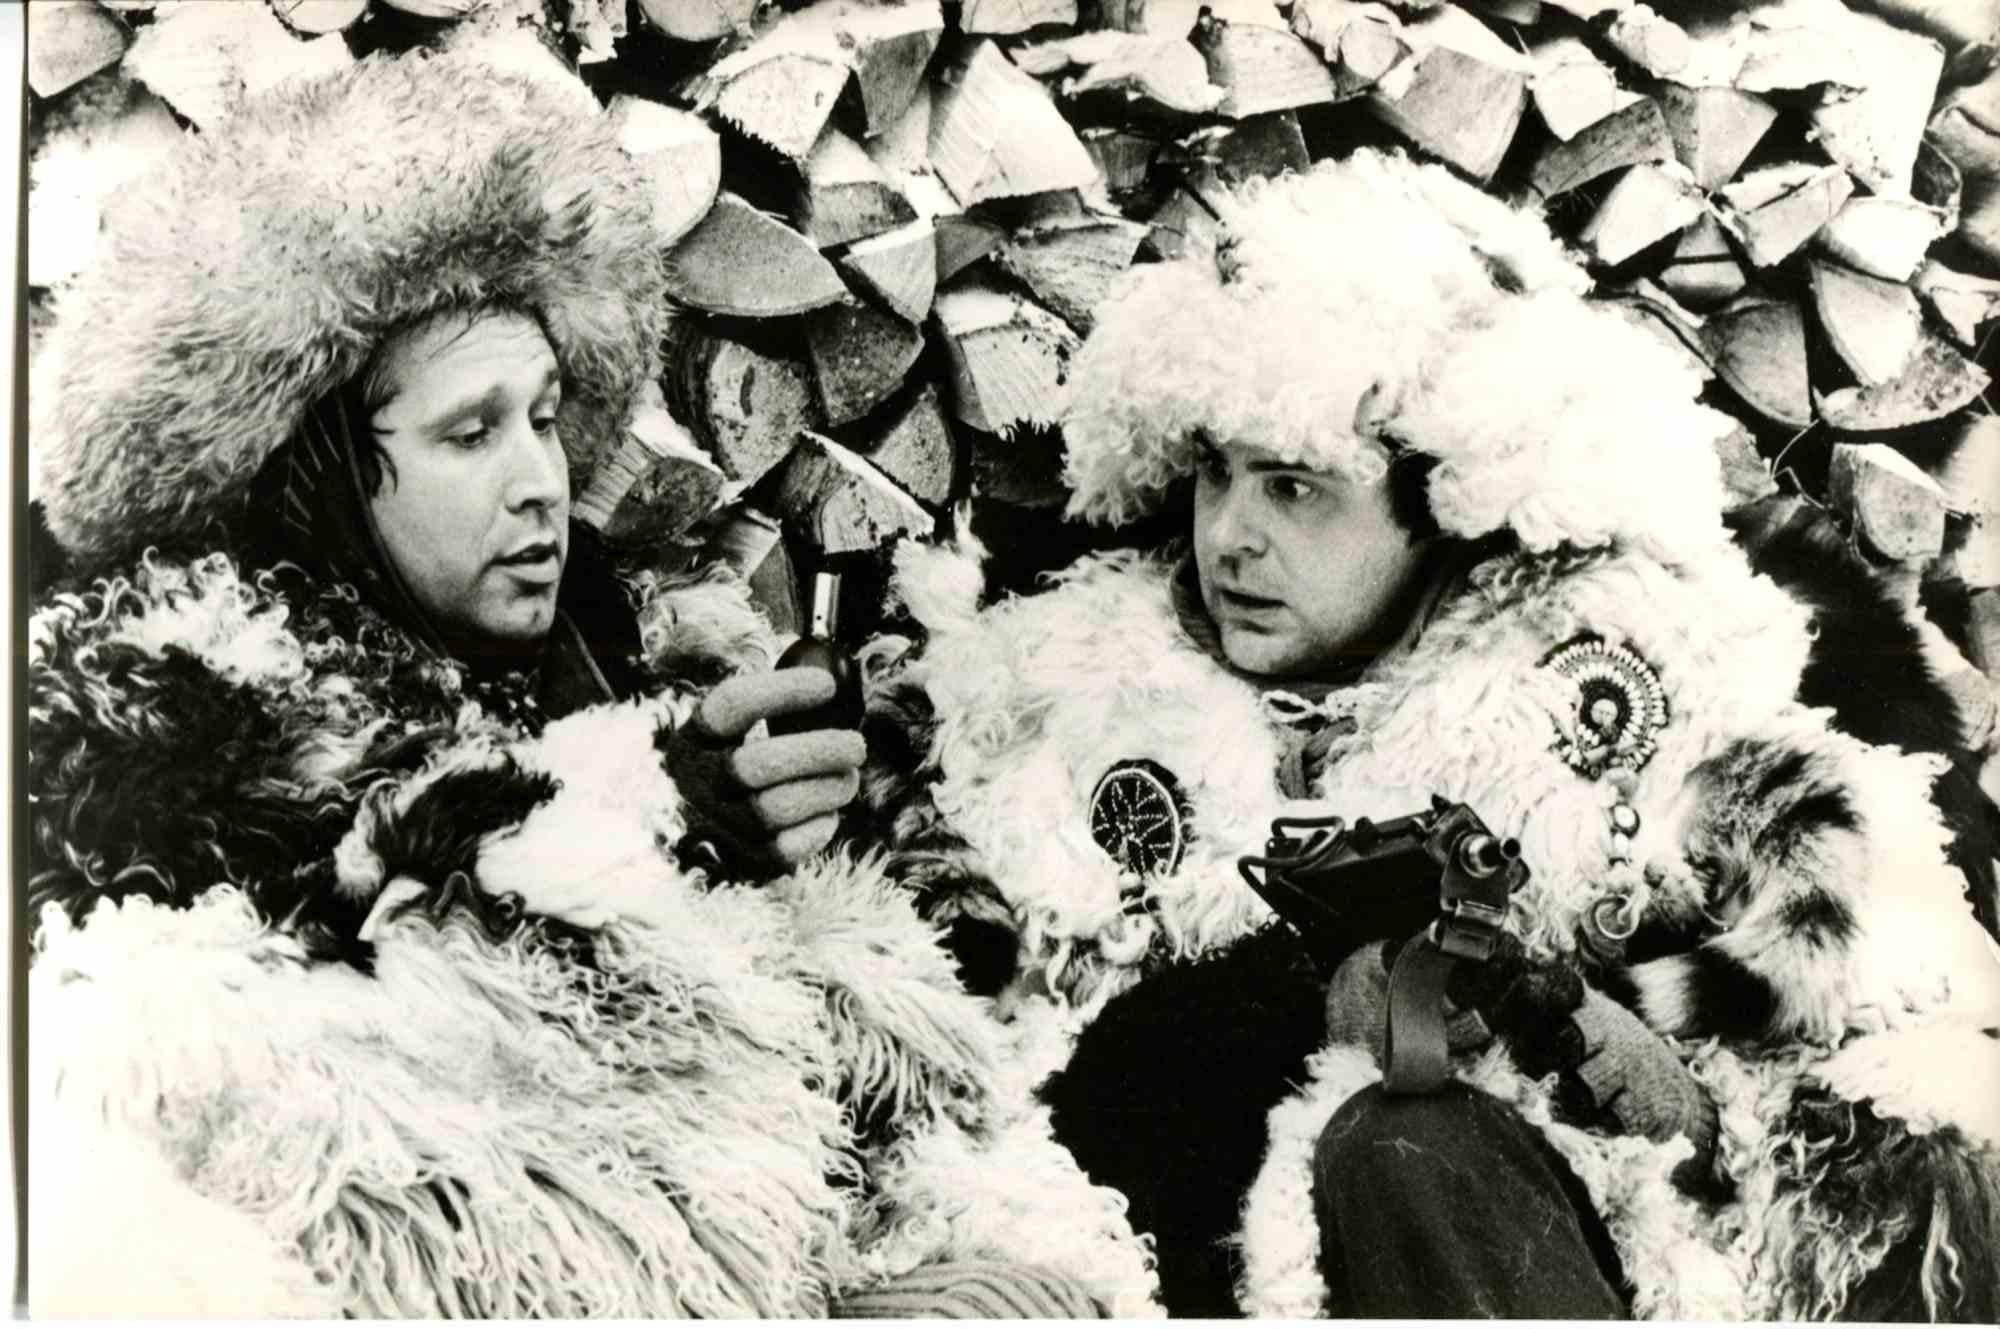 Unknown Figurative Photograph - Chevy Chase and Dan Aykroyd  "Spies Like Us"  - Photo - 1985